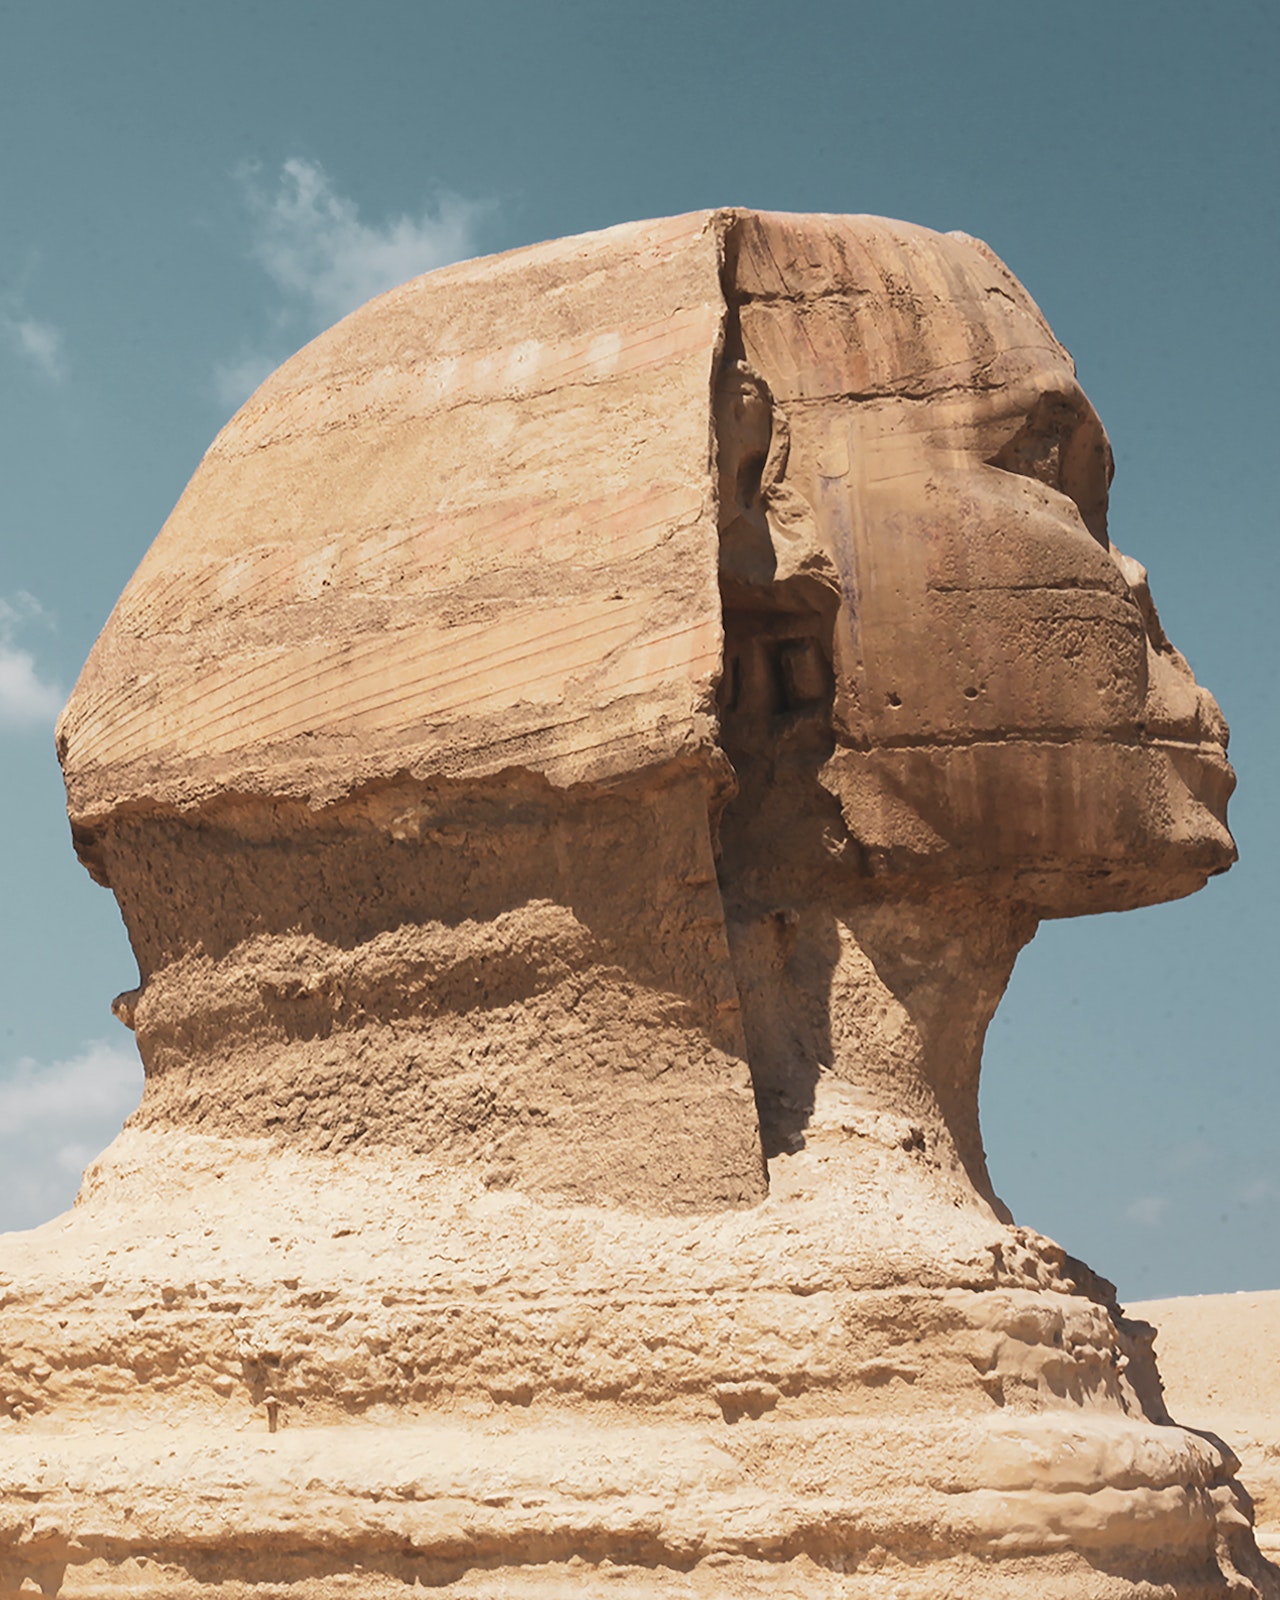 An close up of the Sphinx head where the 1930 concrete renovation is visible